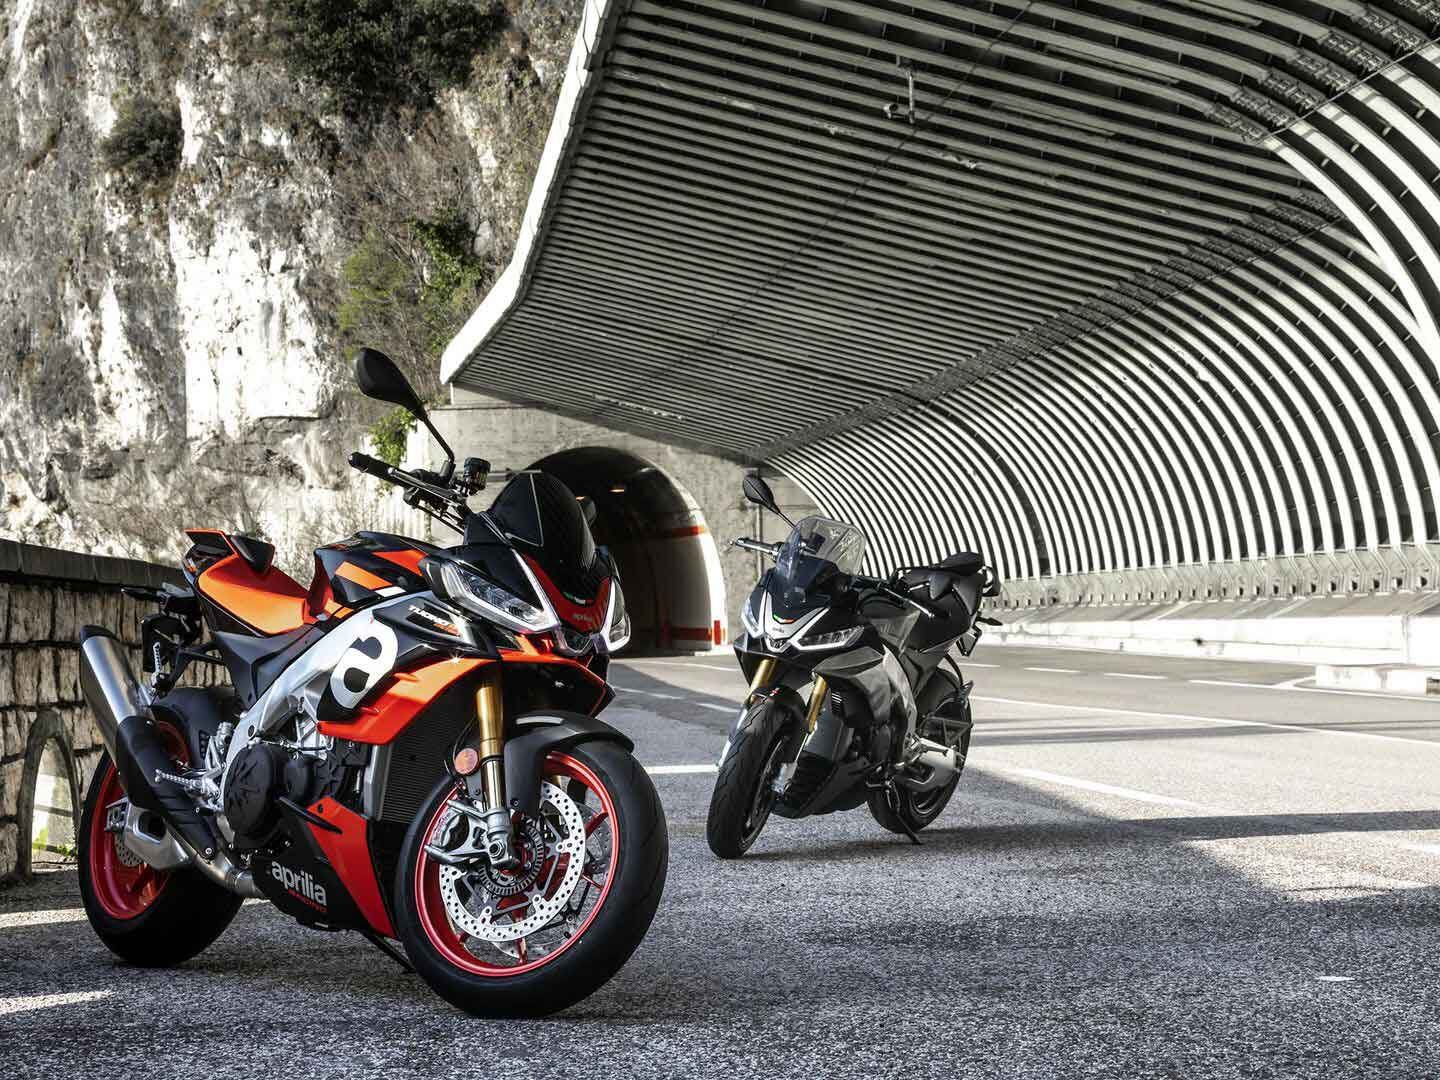 Philosophical question: Are motorcycles fun when not being ridden? A pair of 2022 Aprilia RSV Tuonos await your response.